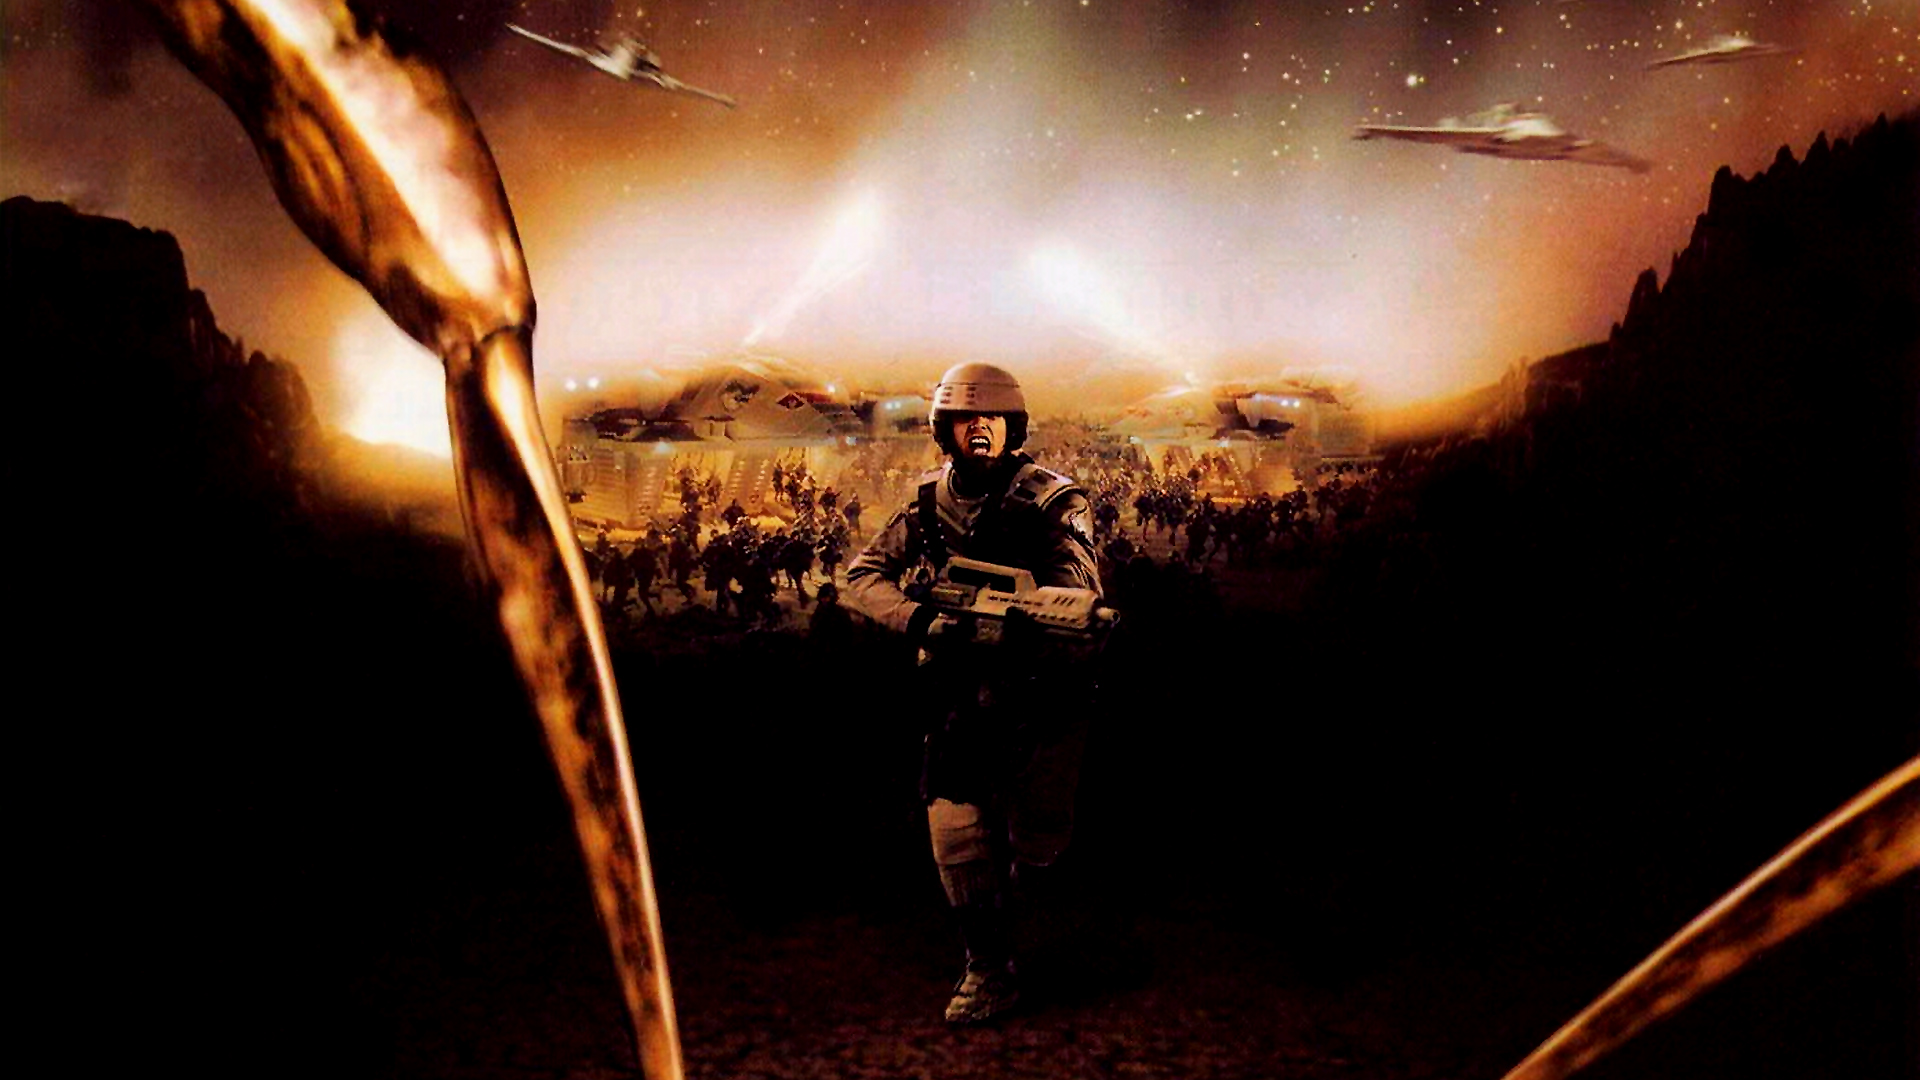 Movie Starship Troopers HD Wallpaper Background Image.